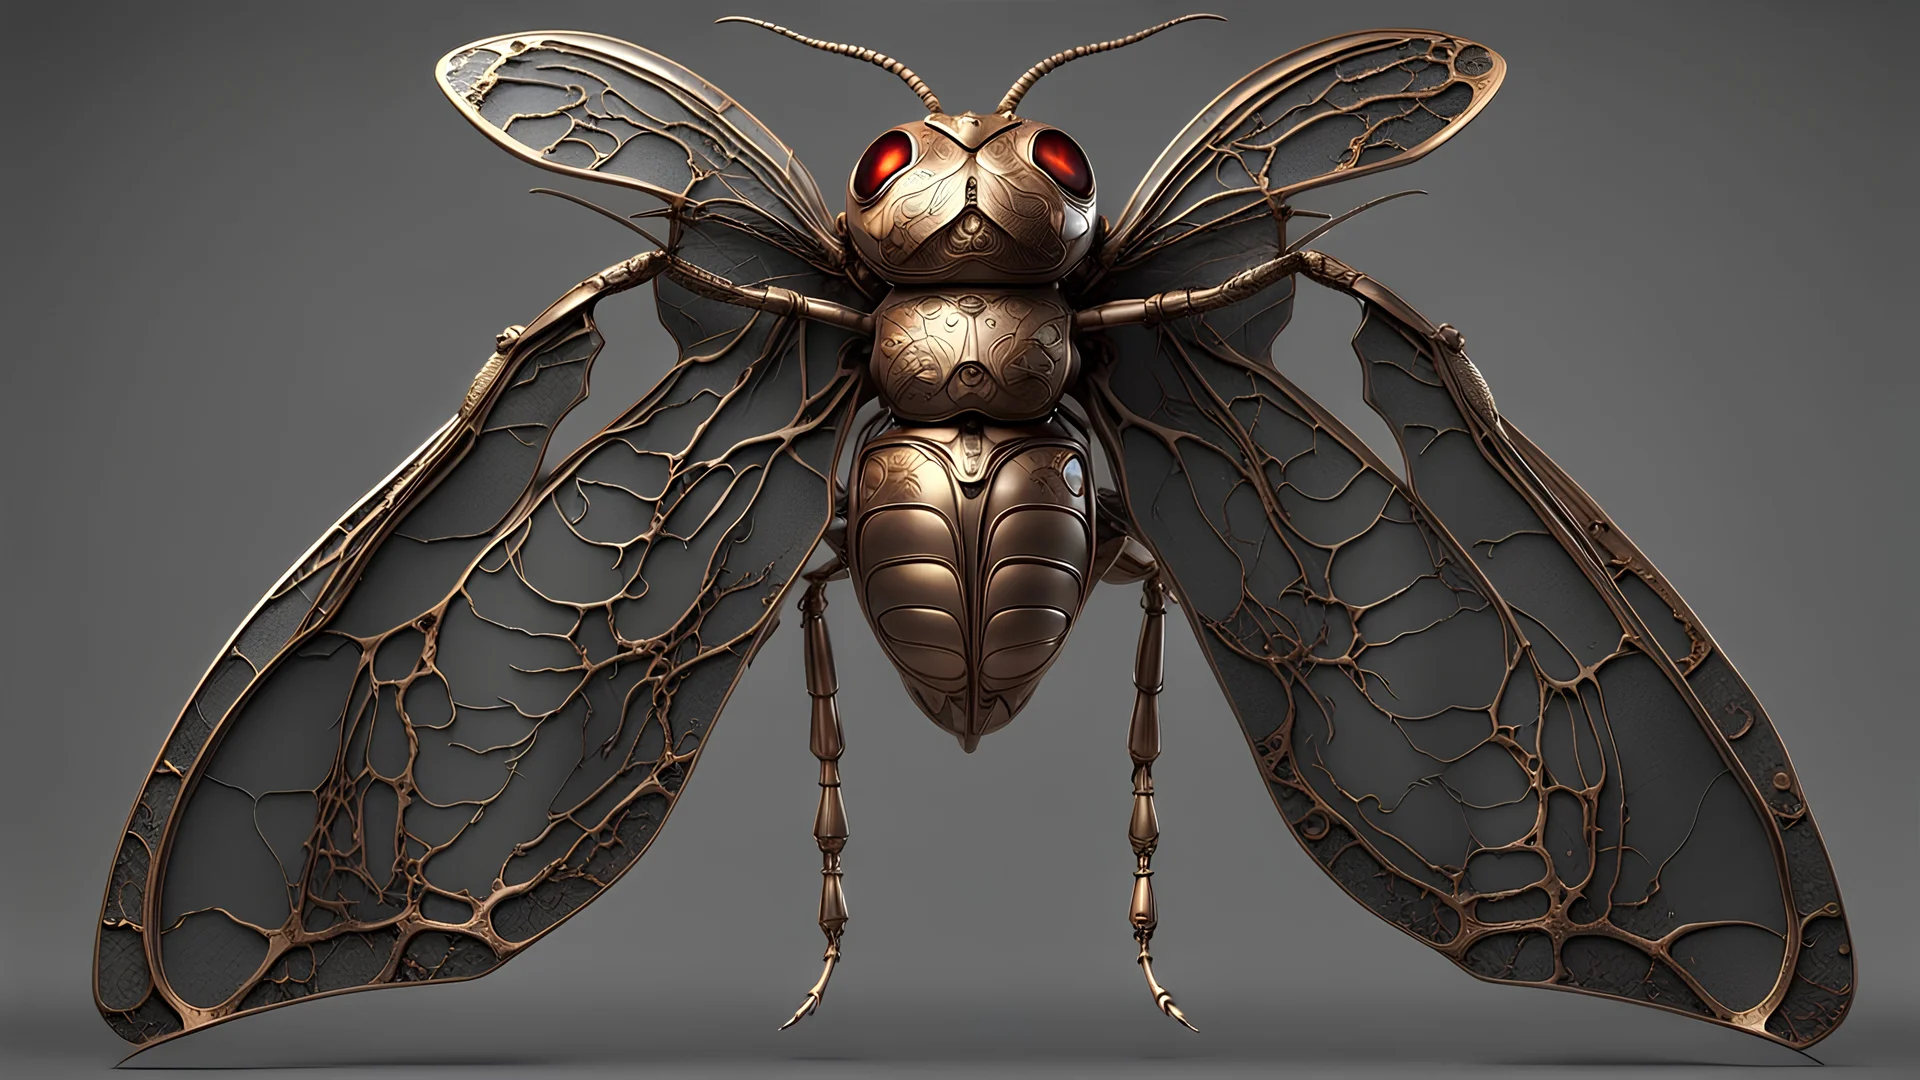 Expressively detailed and intricate 3d rendering of a hyperrealistic “insect wings”: shinning metal, front view, full anatomy, symetric, 4K, cosmic fractals, dystopian, dendritic, stylized fantasy art by Kris Kuksi, artstation: award-winning: professional portrait: atmospheric: commanding: fantastical: clarity: 16k: ultra quality: striking: brilliance: stunning colors: masterfully crafted.